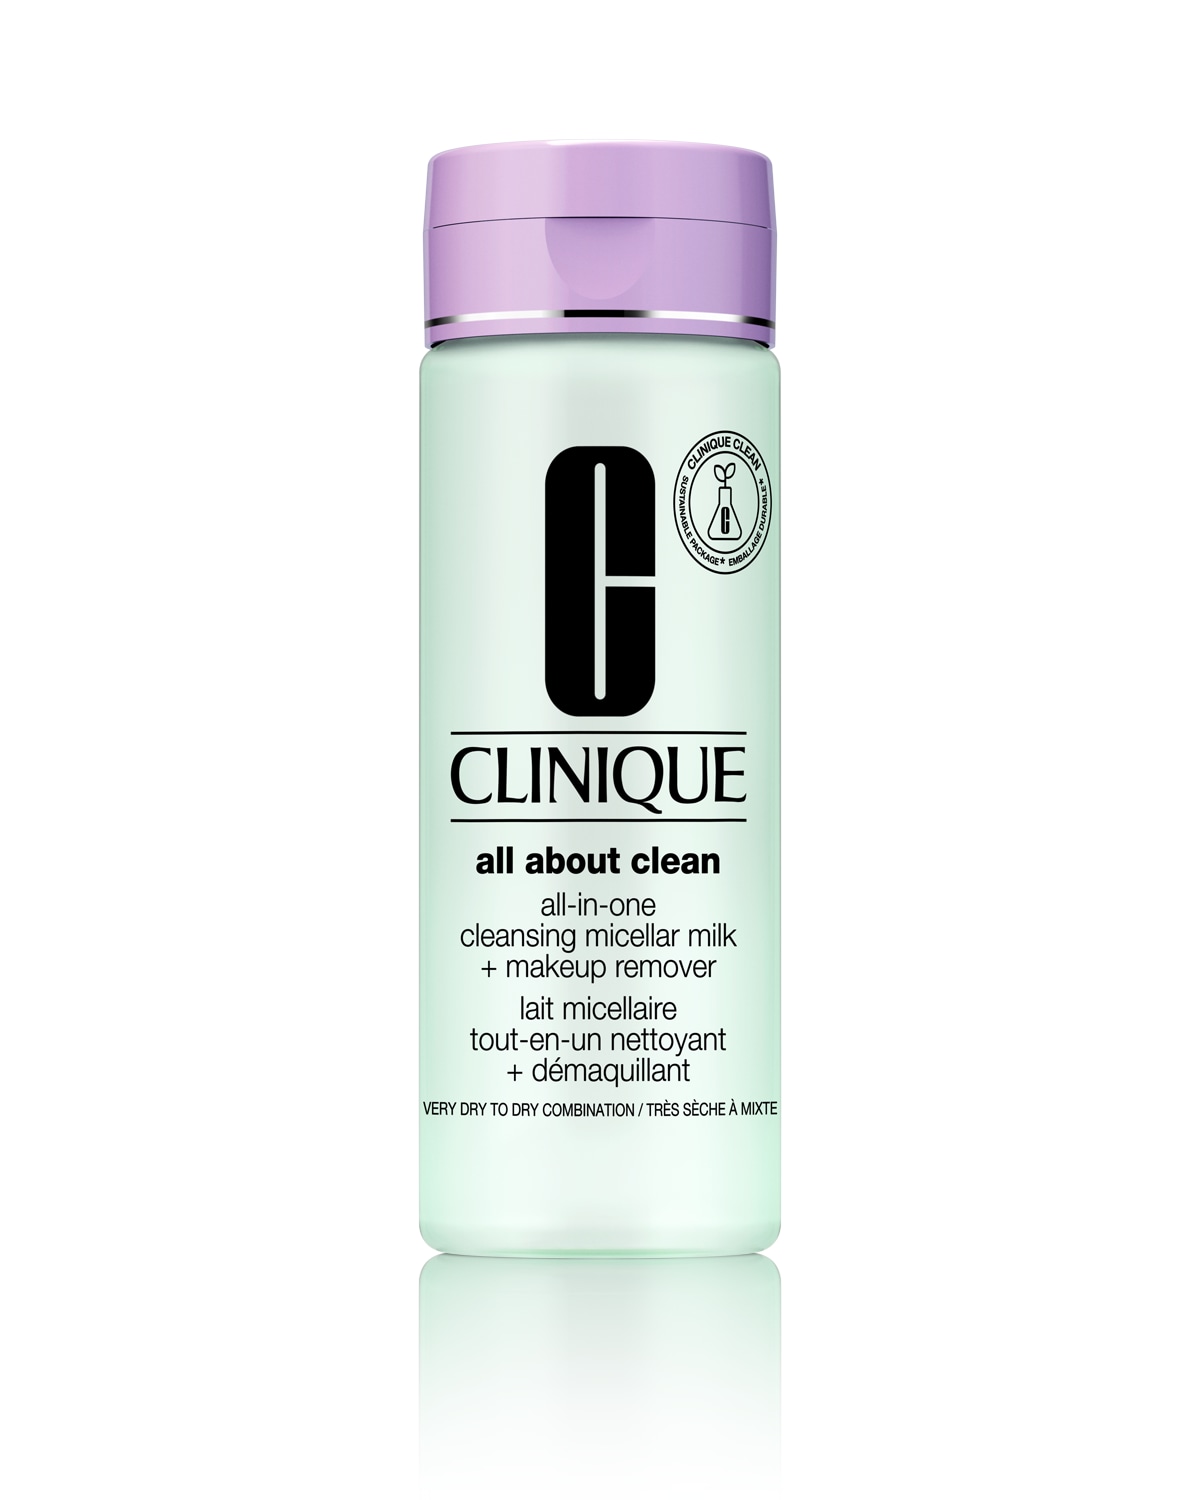 All about Clean™ All-in-One Cleansing Micellar Milk + Makeup Remover